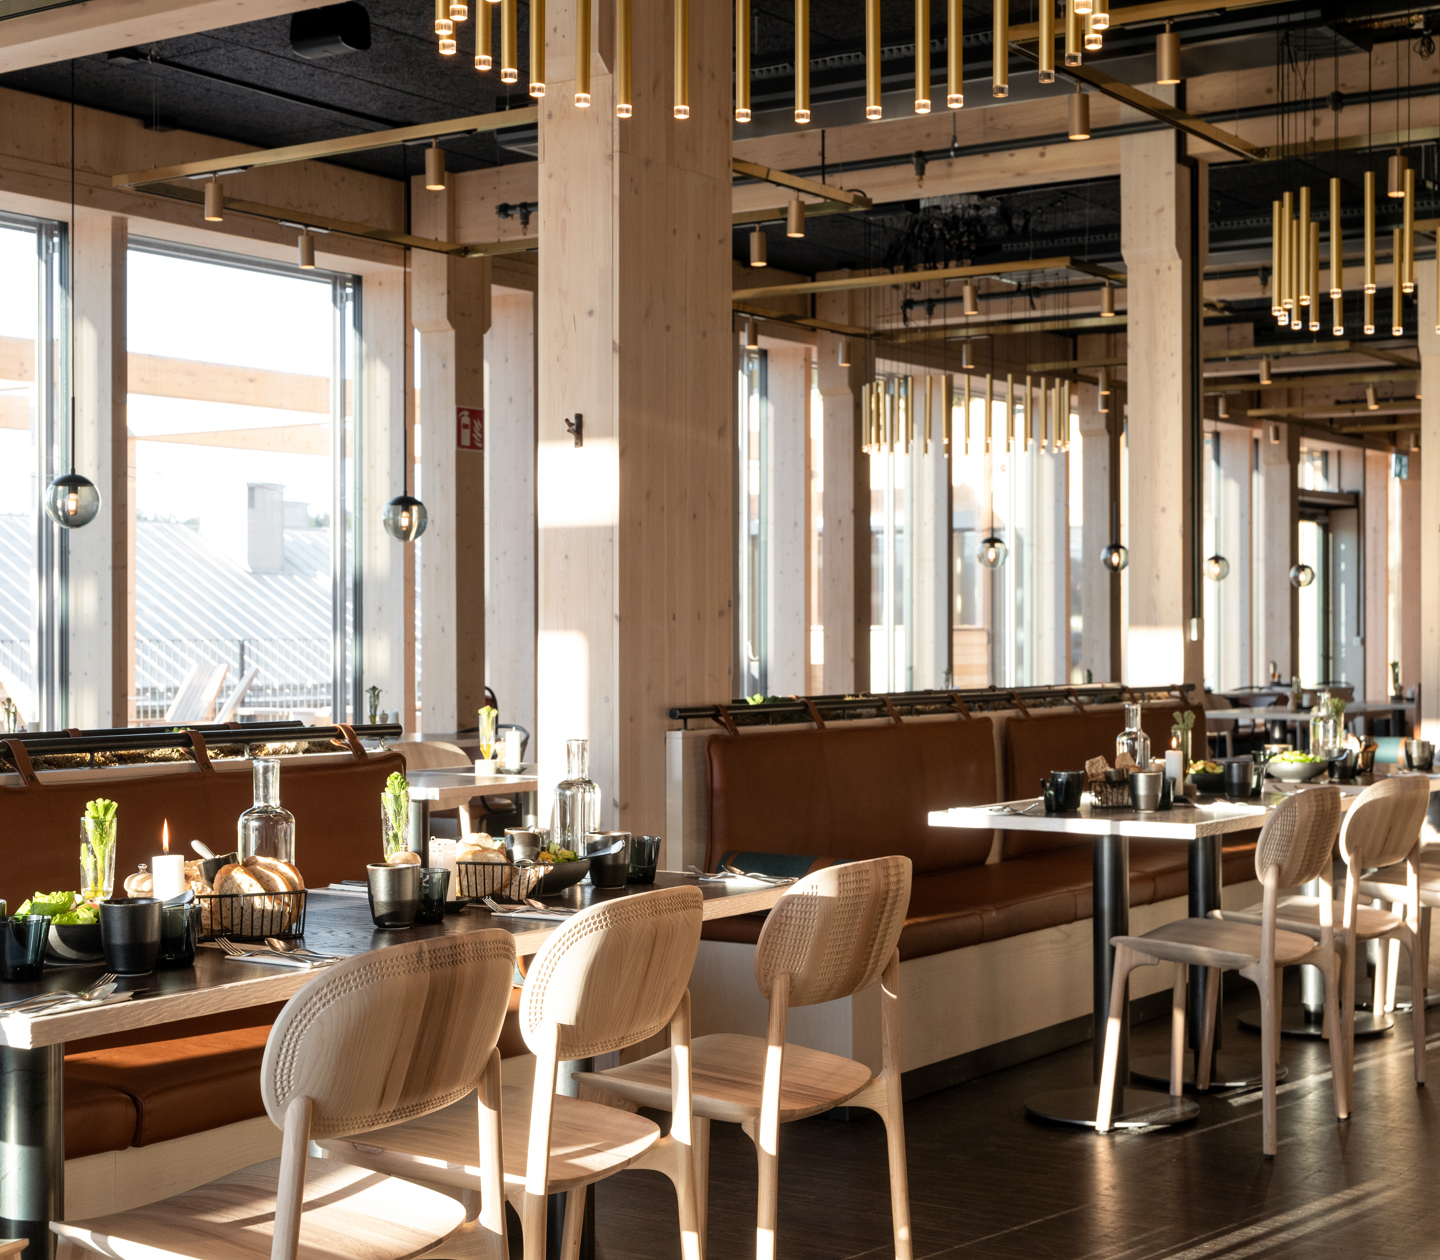 A modern restaurant with several elements of wood in the interior